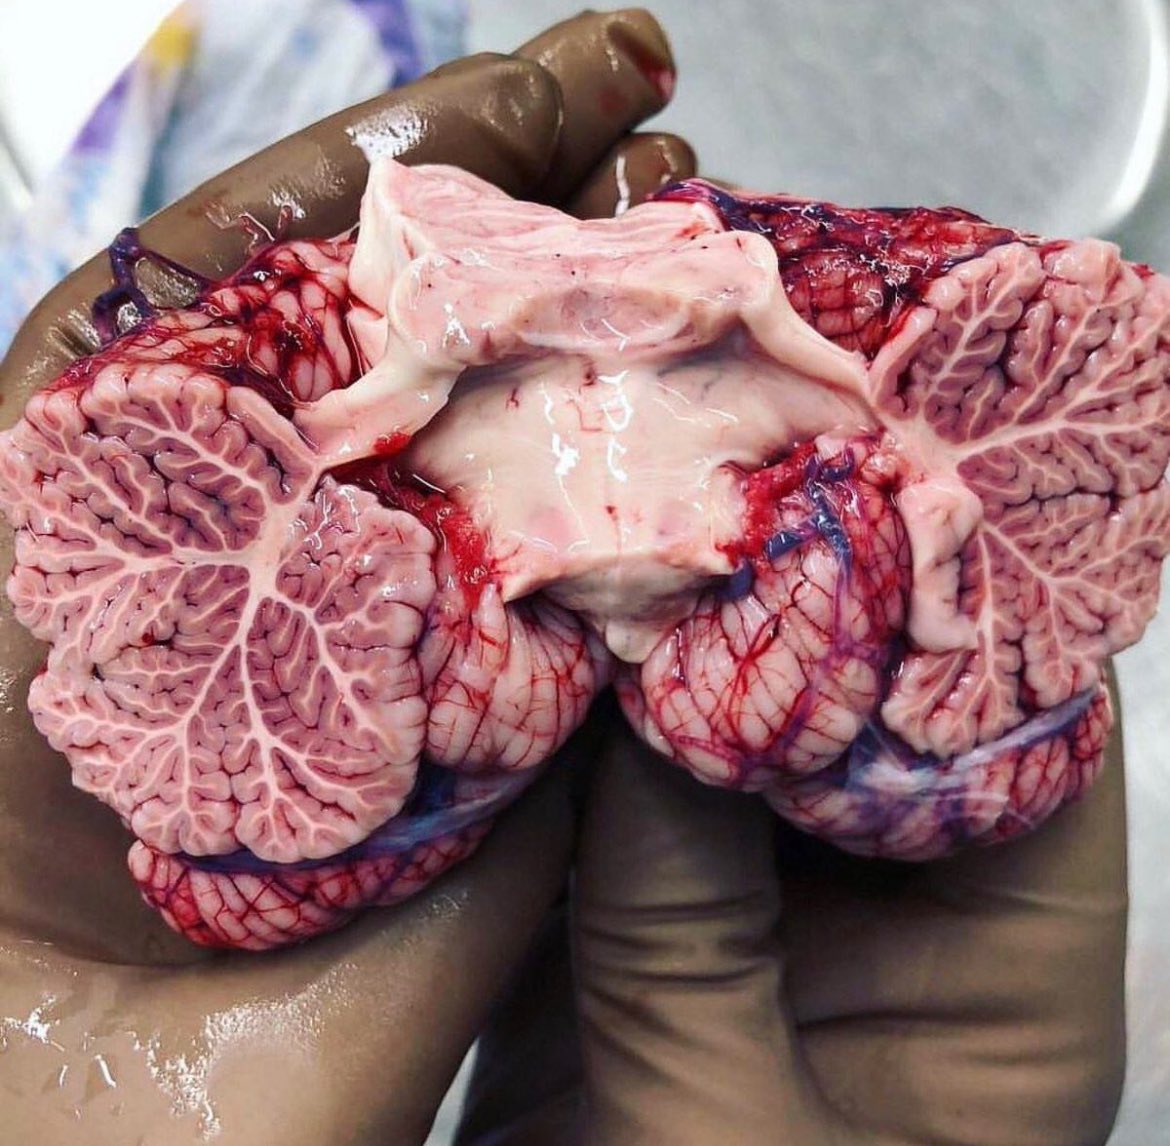 Which anatomical structure is this? Comment ur answer